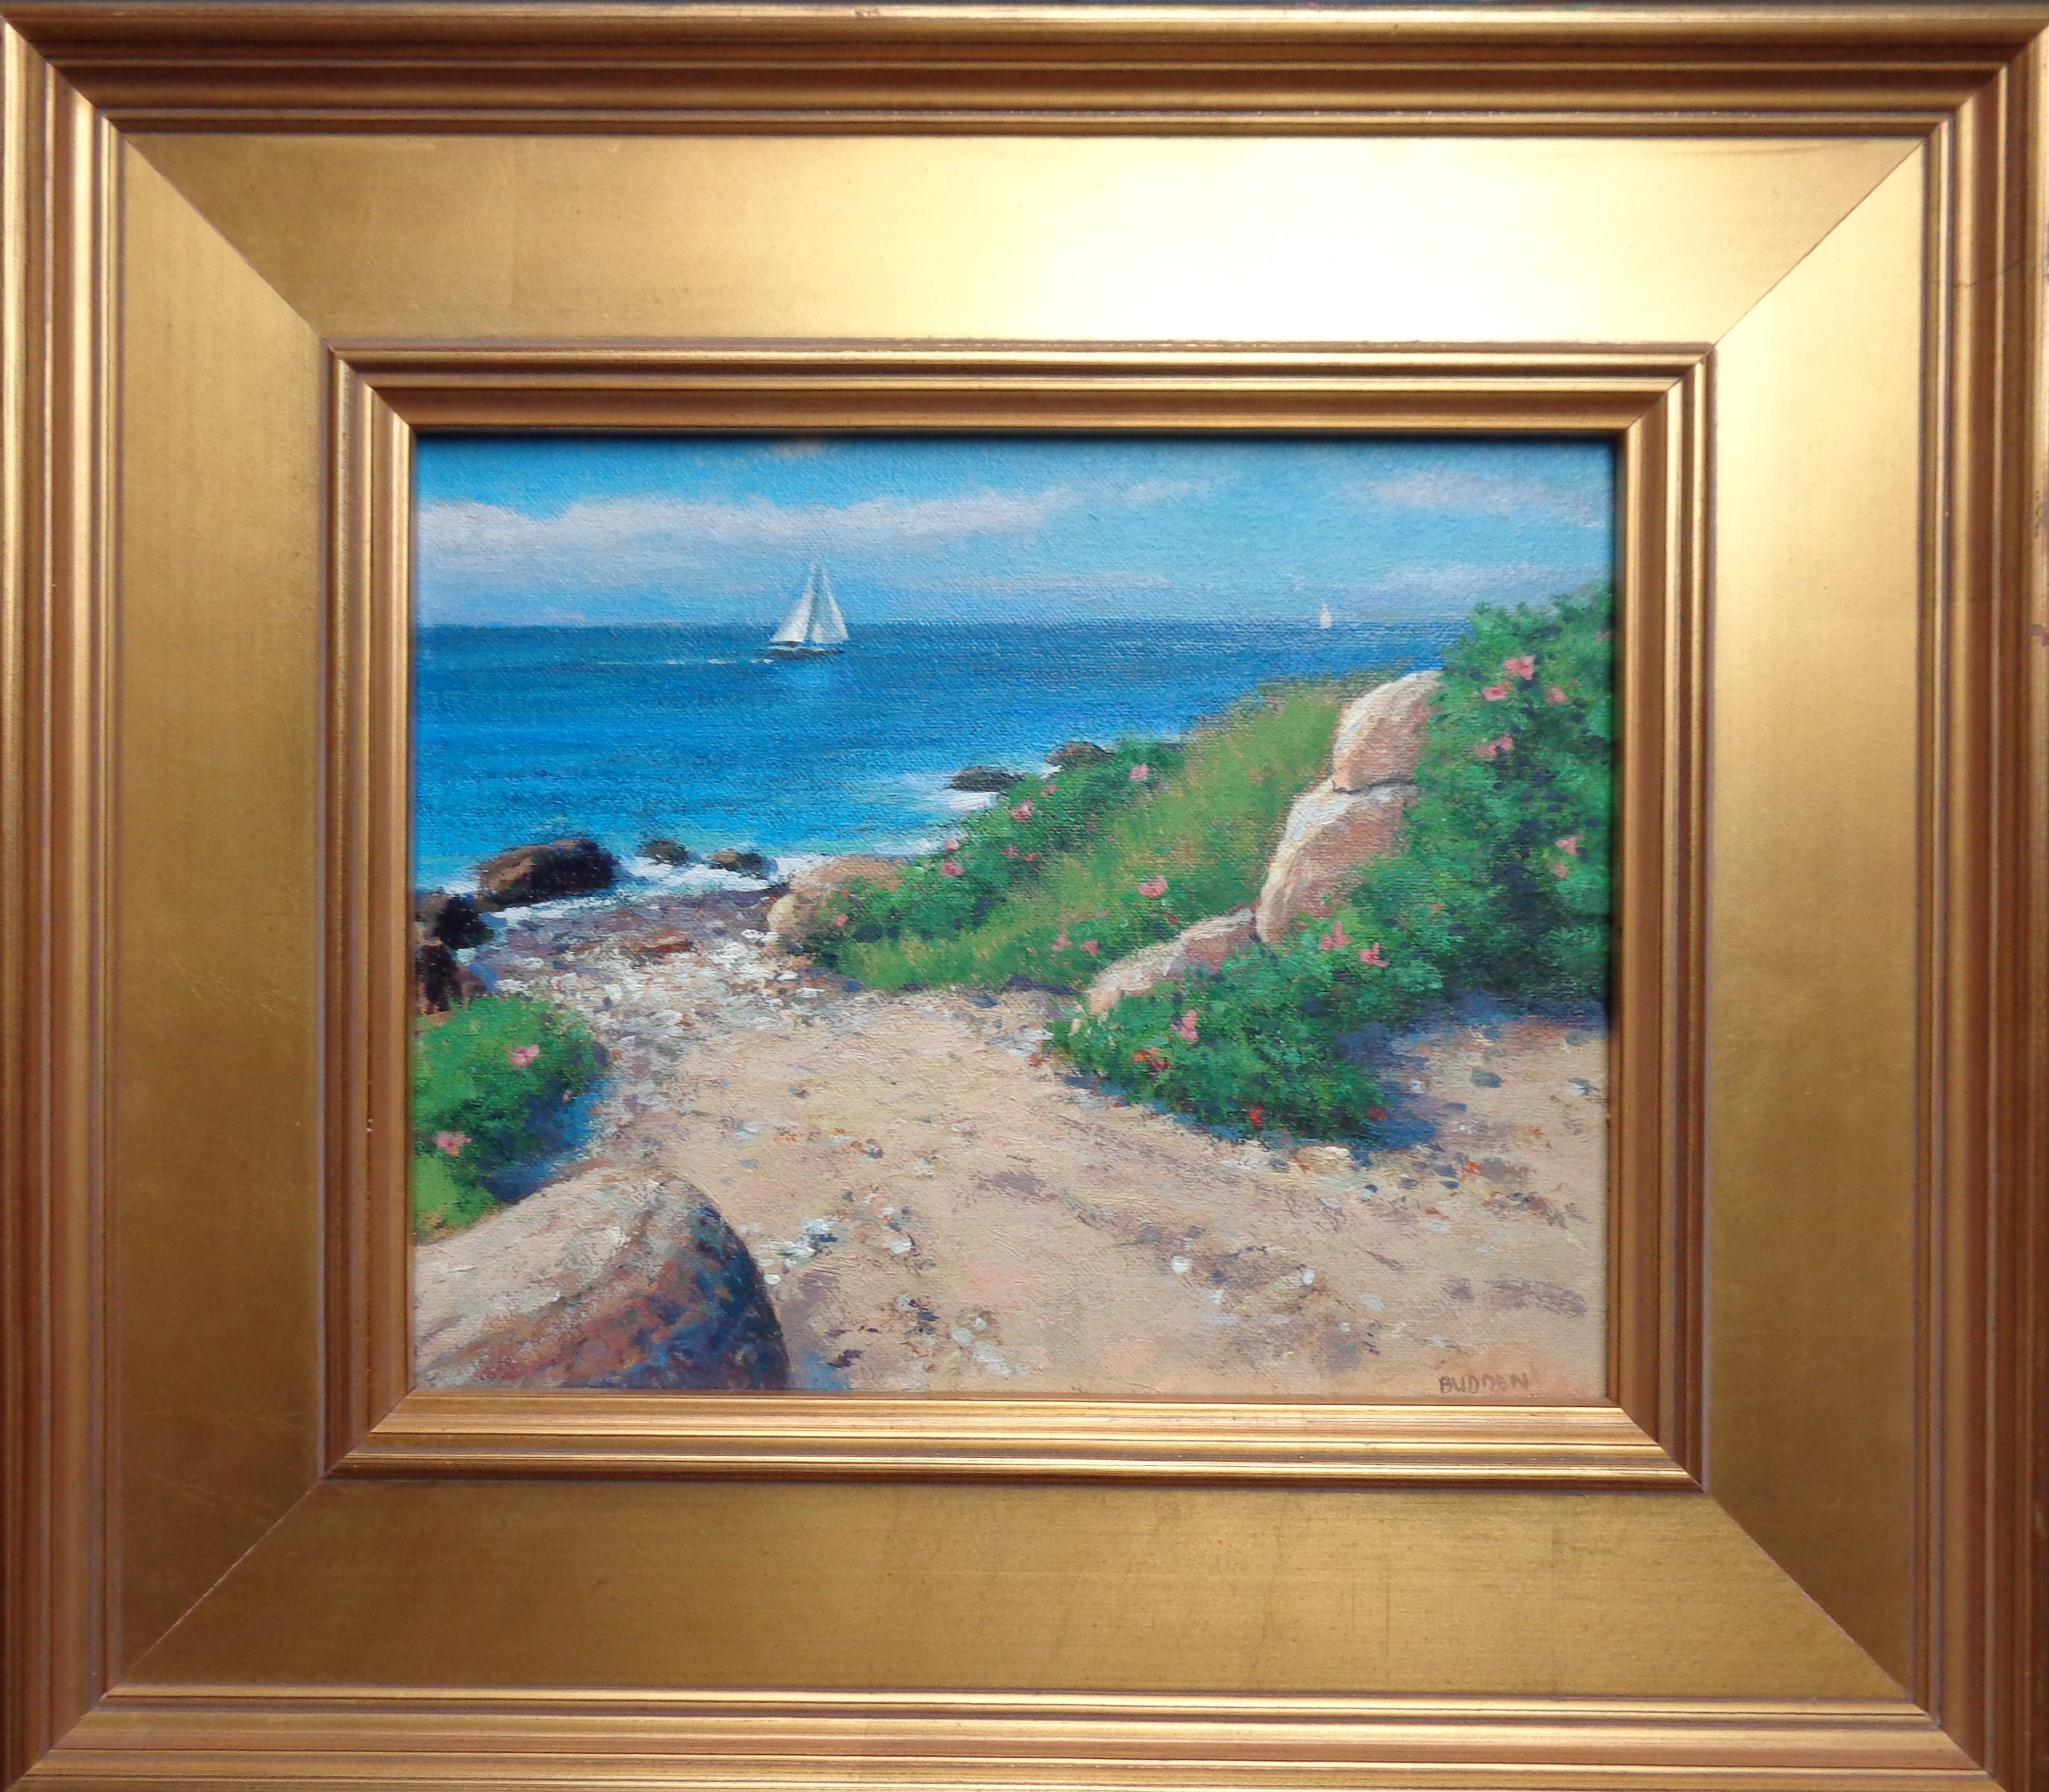 An oil painting on panel by award winning contemporary artist Michael Budden that showcases a beautiful sailing scene off a rocky coast on a gorgeous summer day created in an impressionistic realism style. The image measure 8.25 x 10.25 unframed and